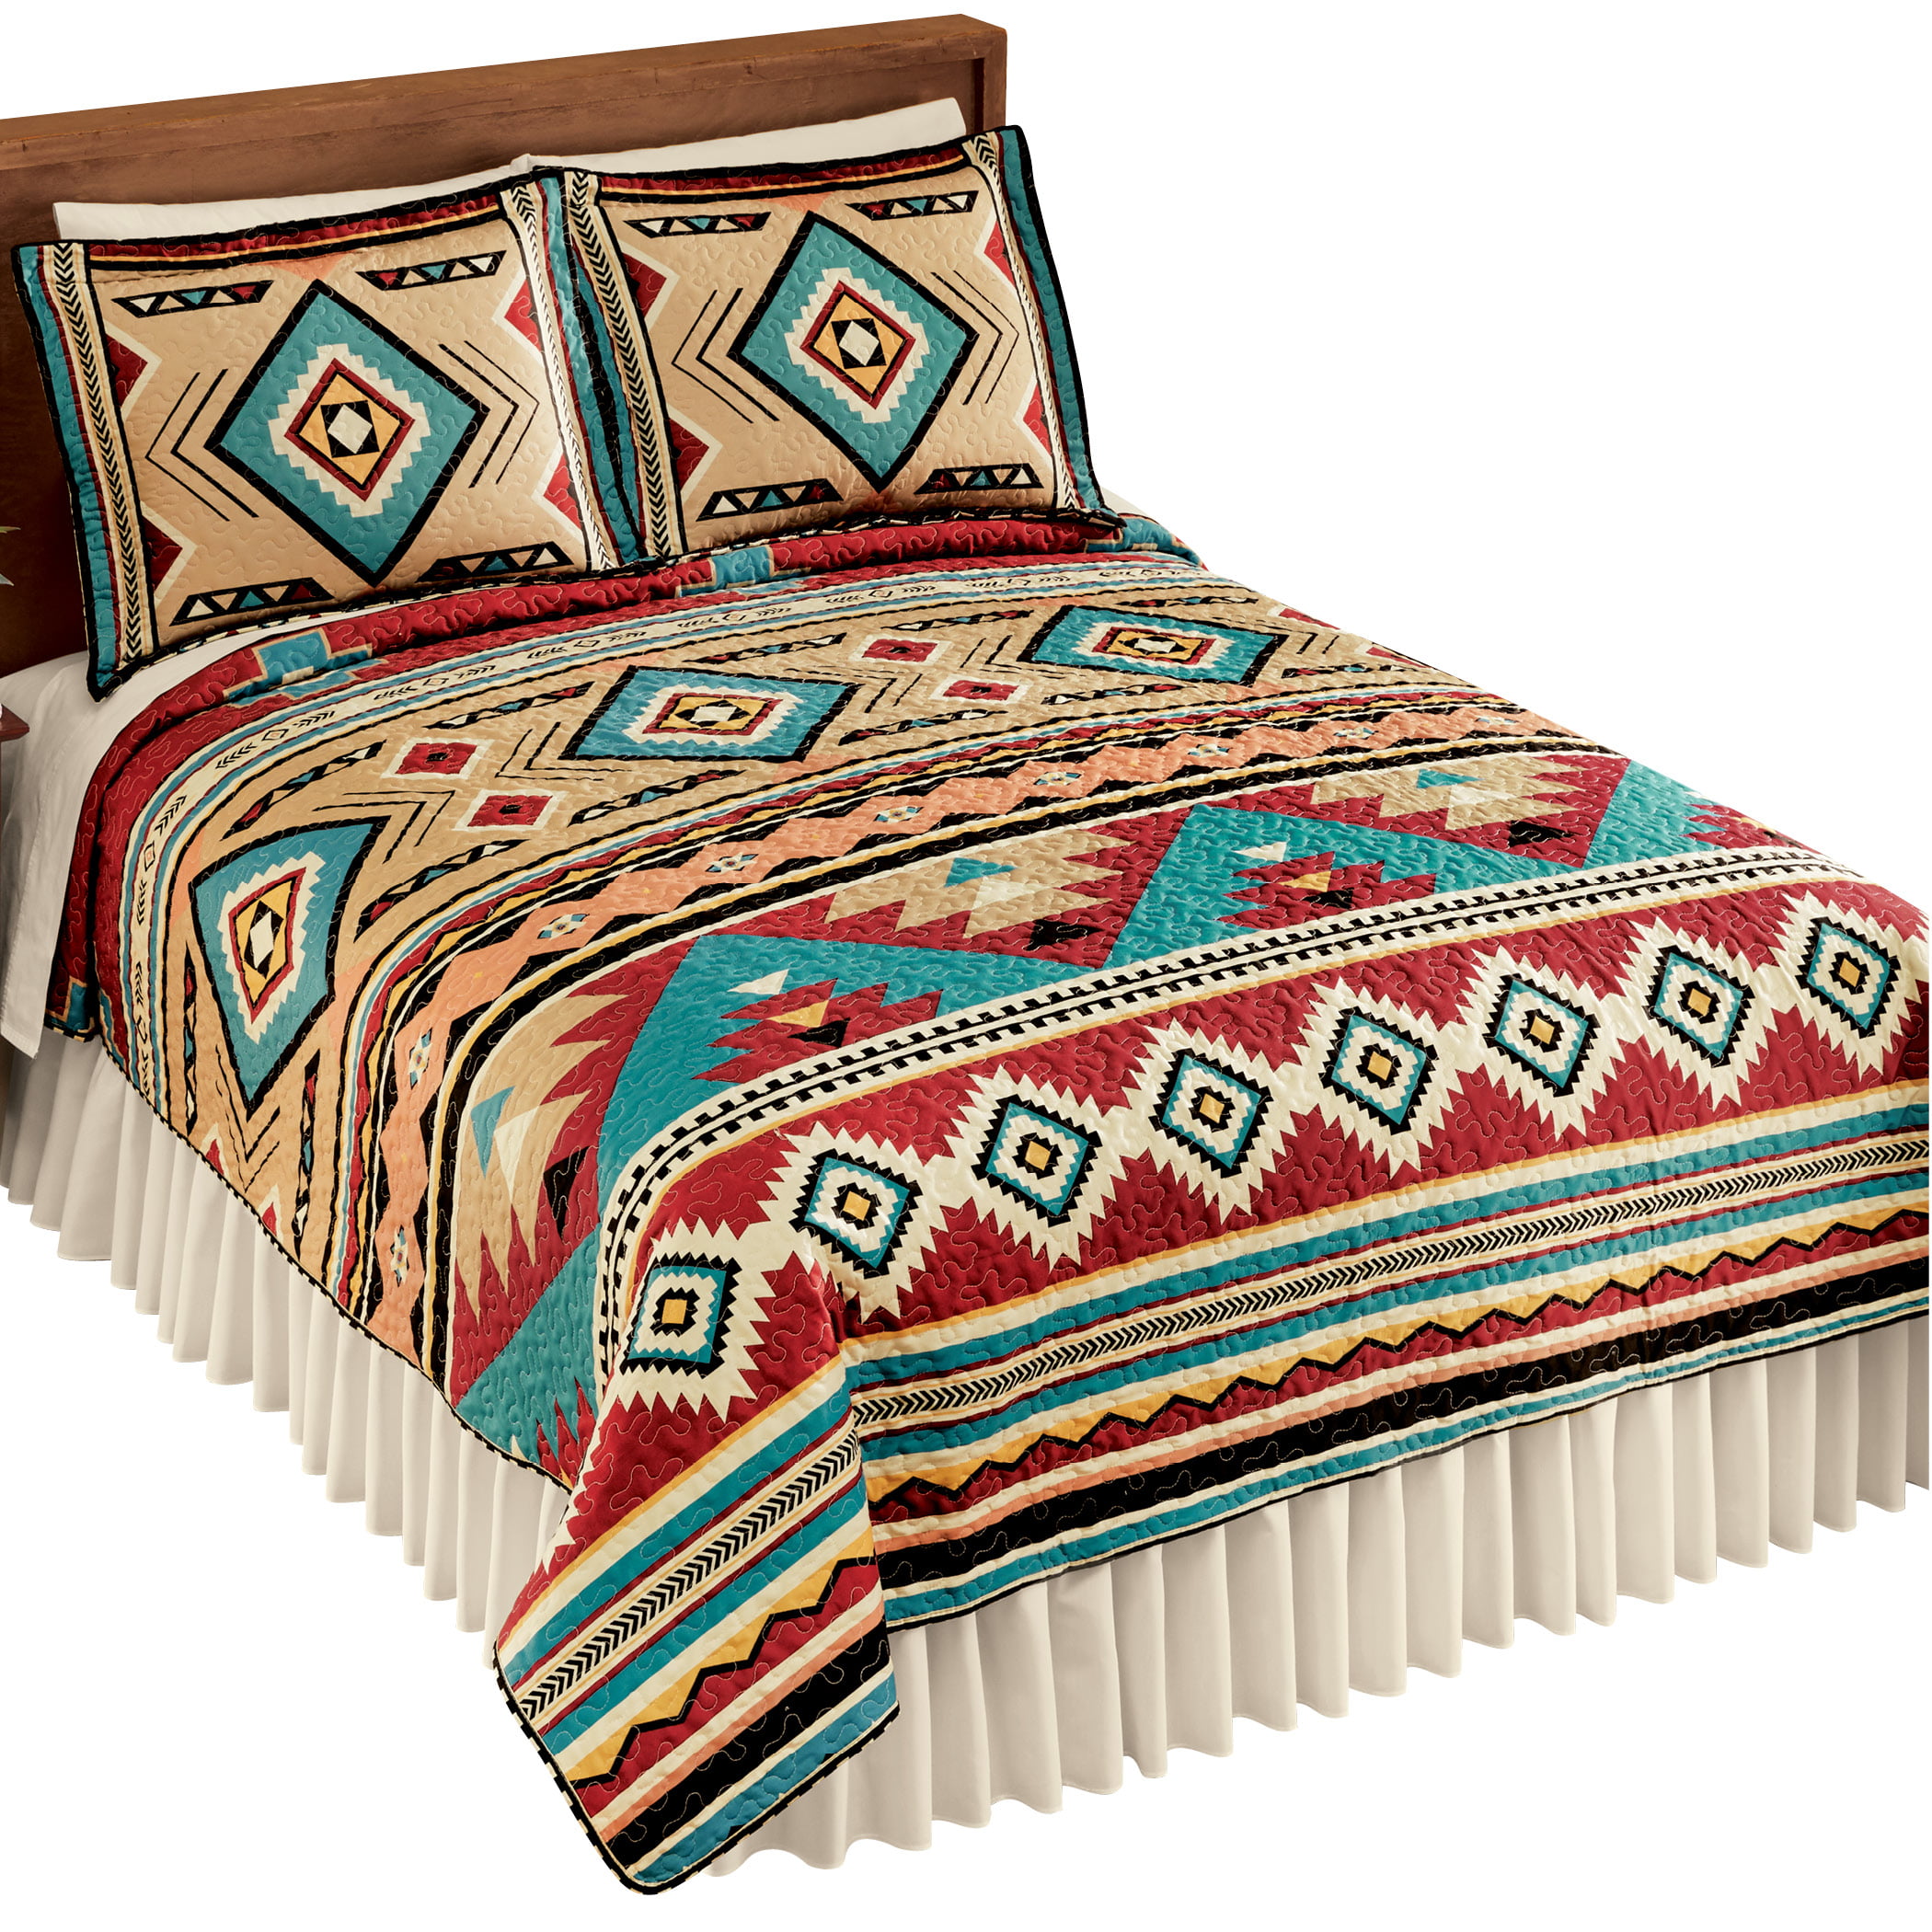 Details about   Beautiful Native American Quilt Blanket 